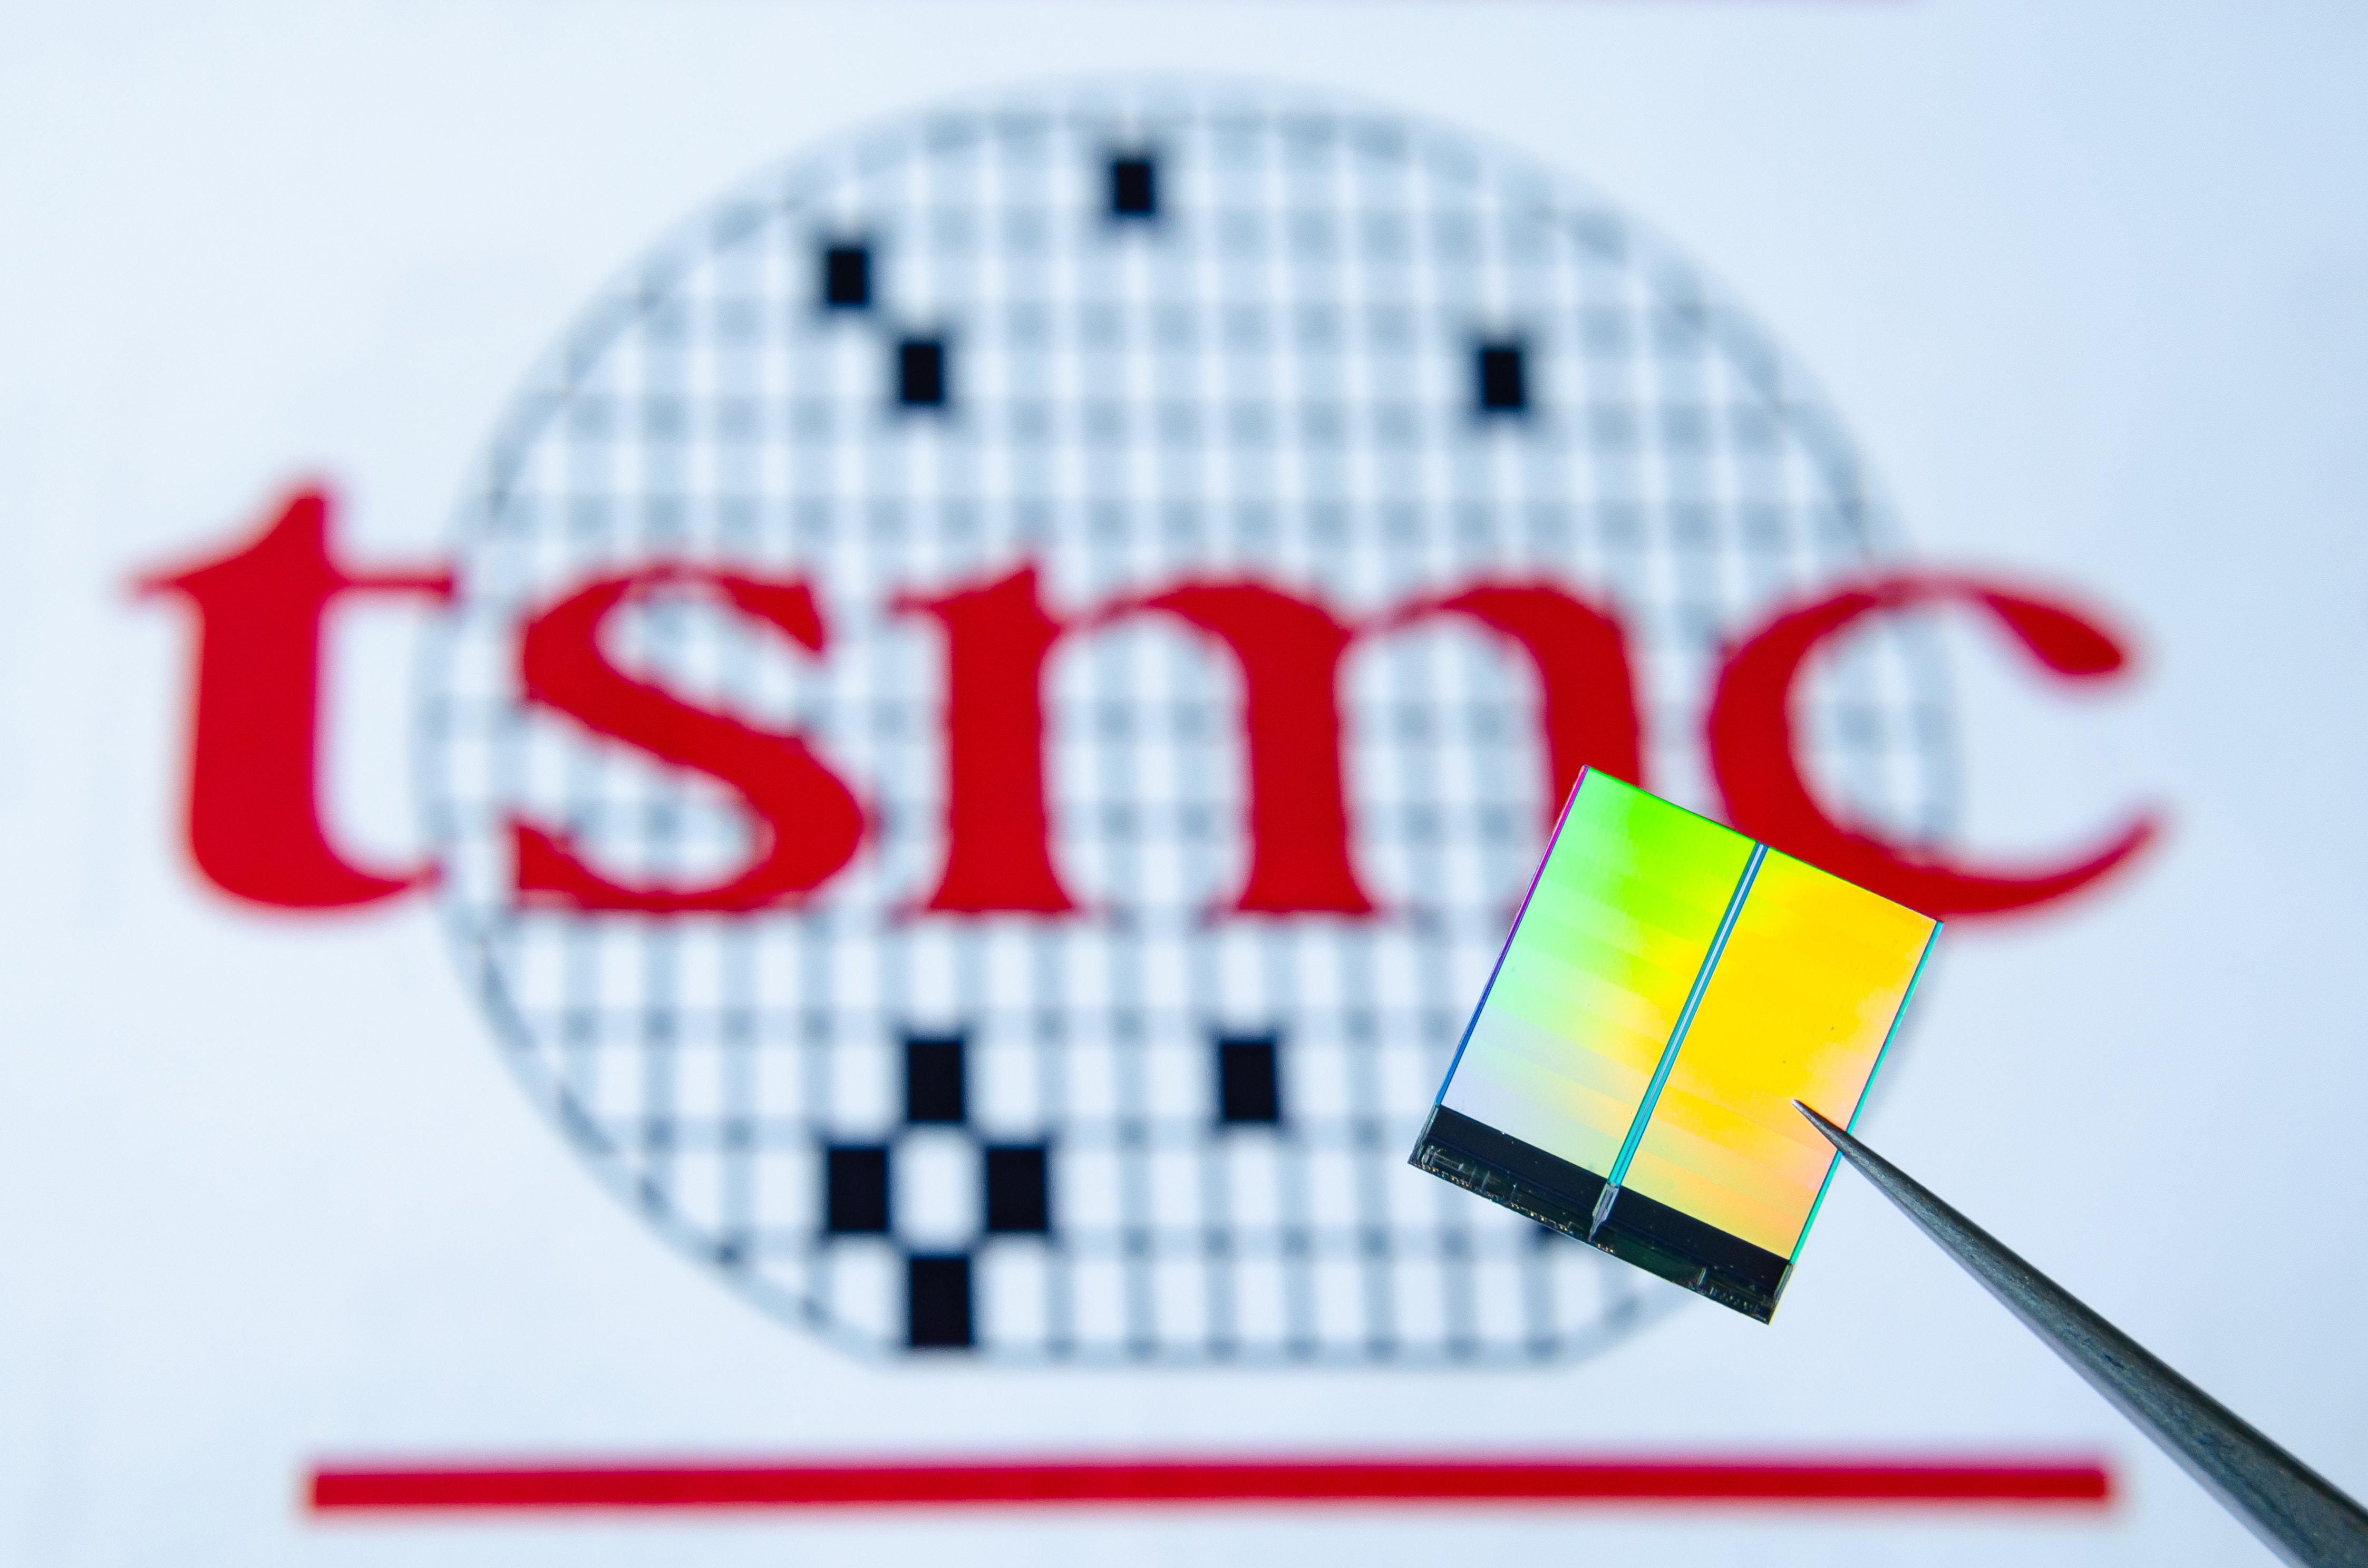 Pelosi Effect? Why Key Apple Supplier TSMC's Shares Are Slipping Today